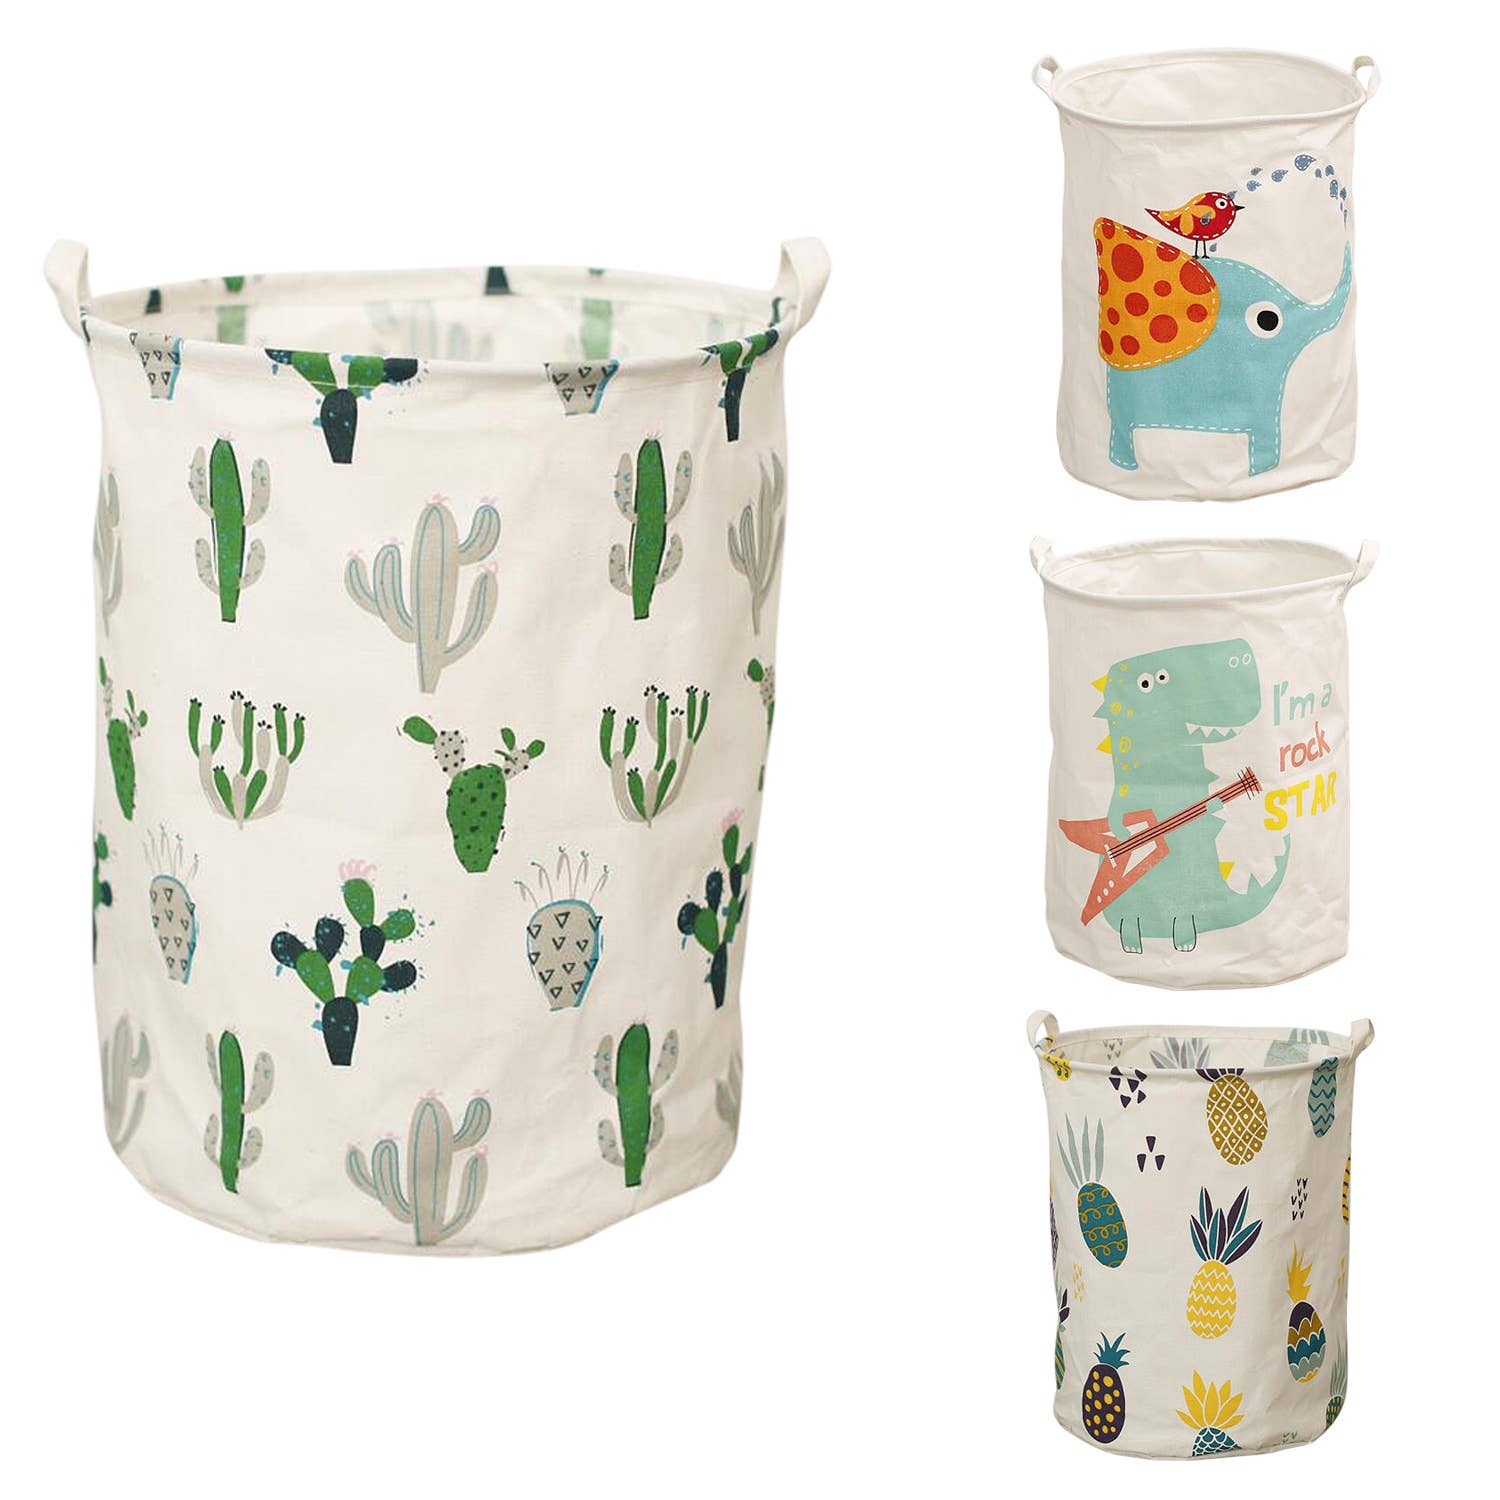 Cute Laundry Hampers Collapsible, Waterproof Storage Baskets